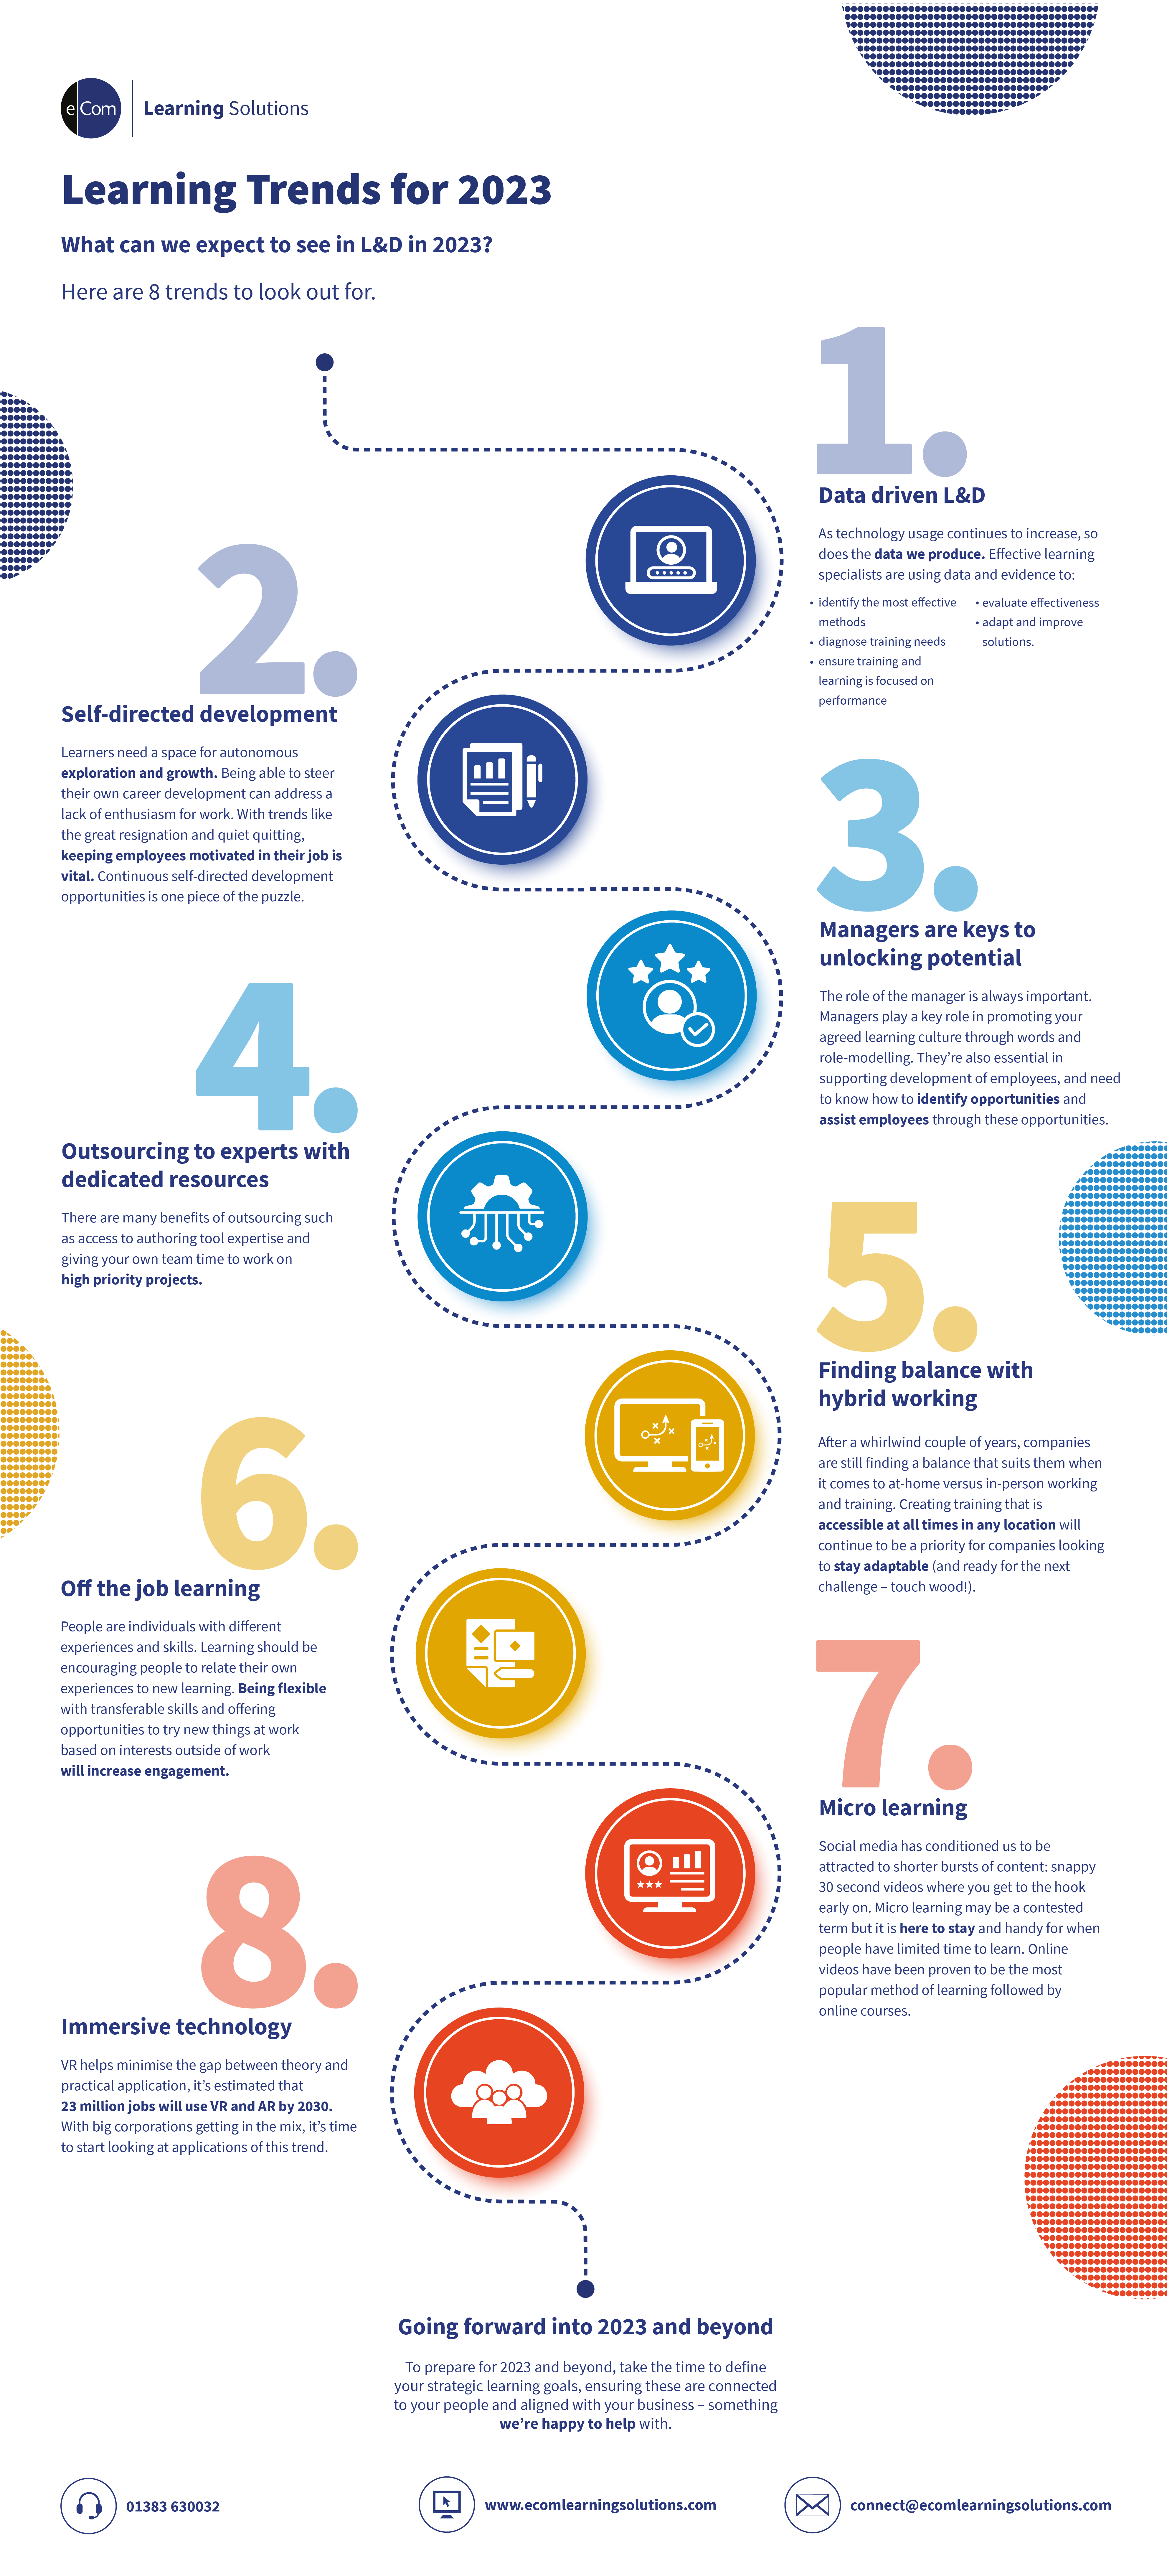 8 Learning Trends for 2023